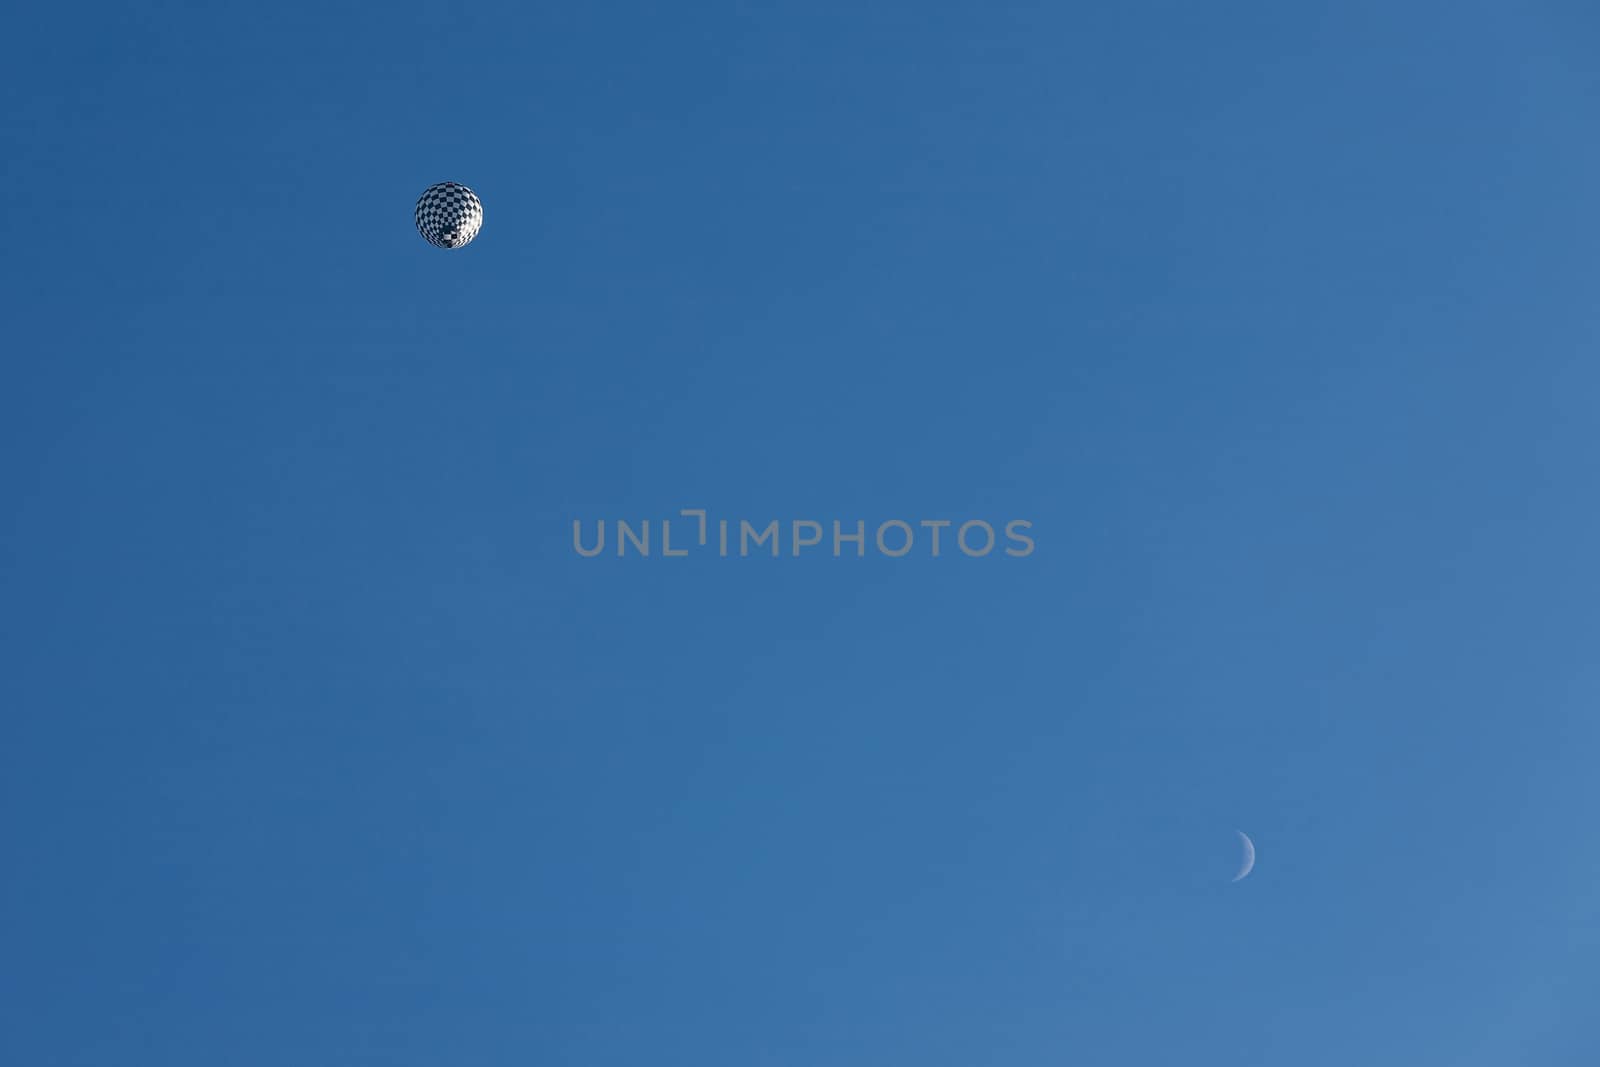 Black and white balloon in flight and moon seen from below against a blue sky